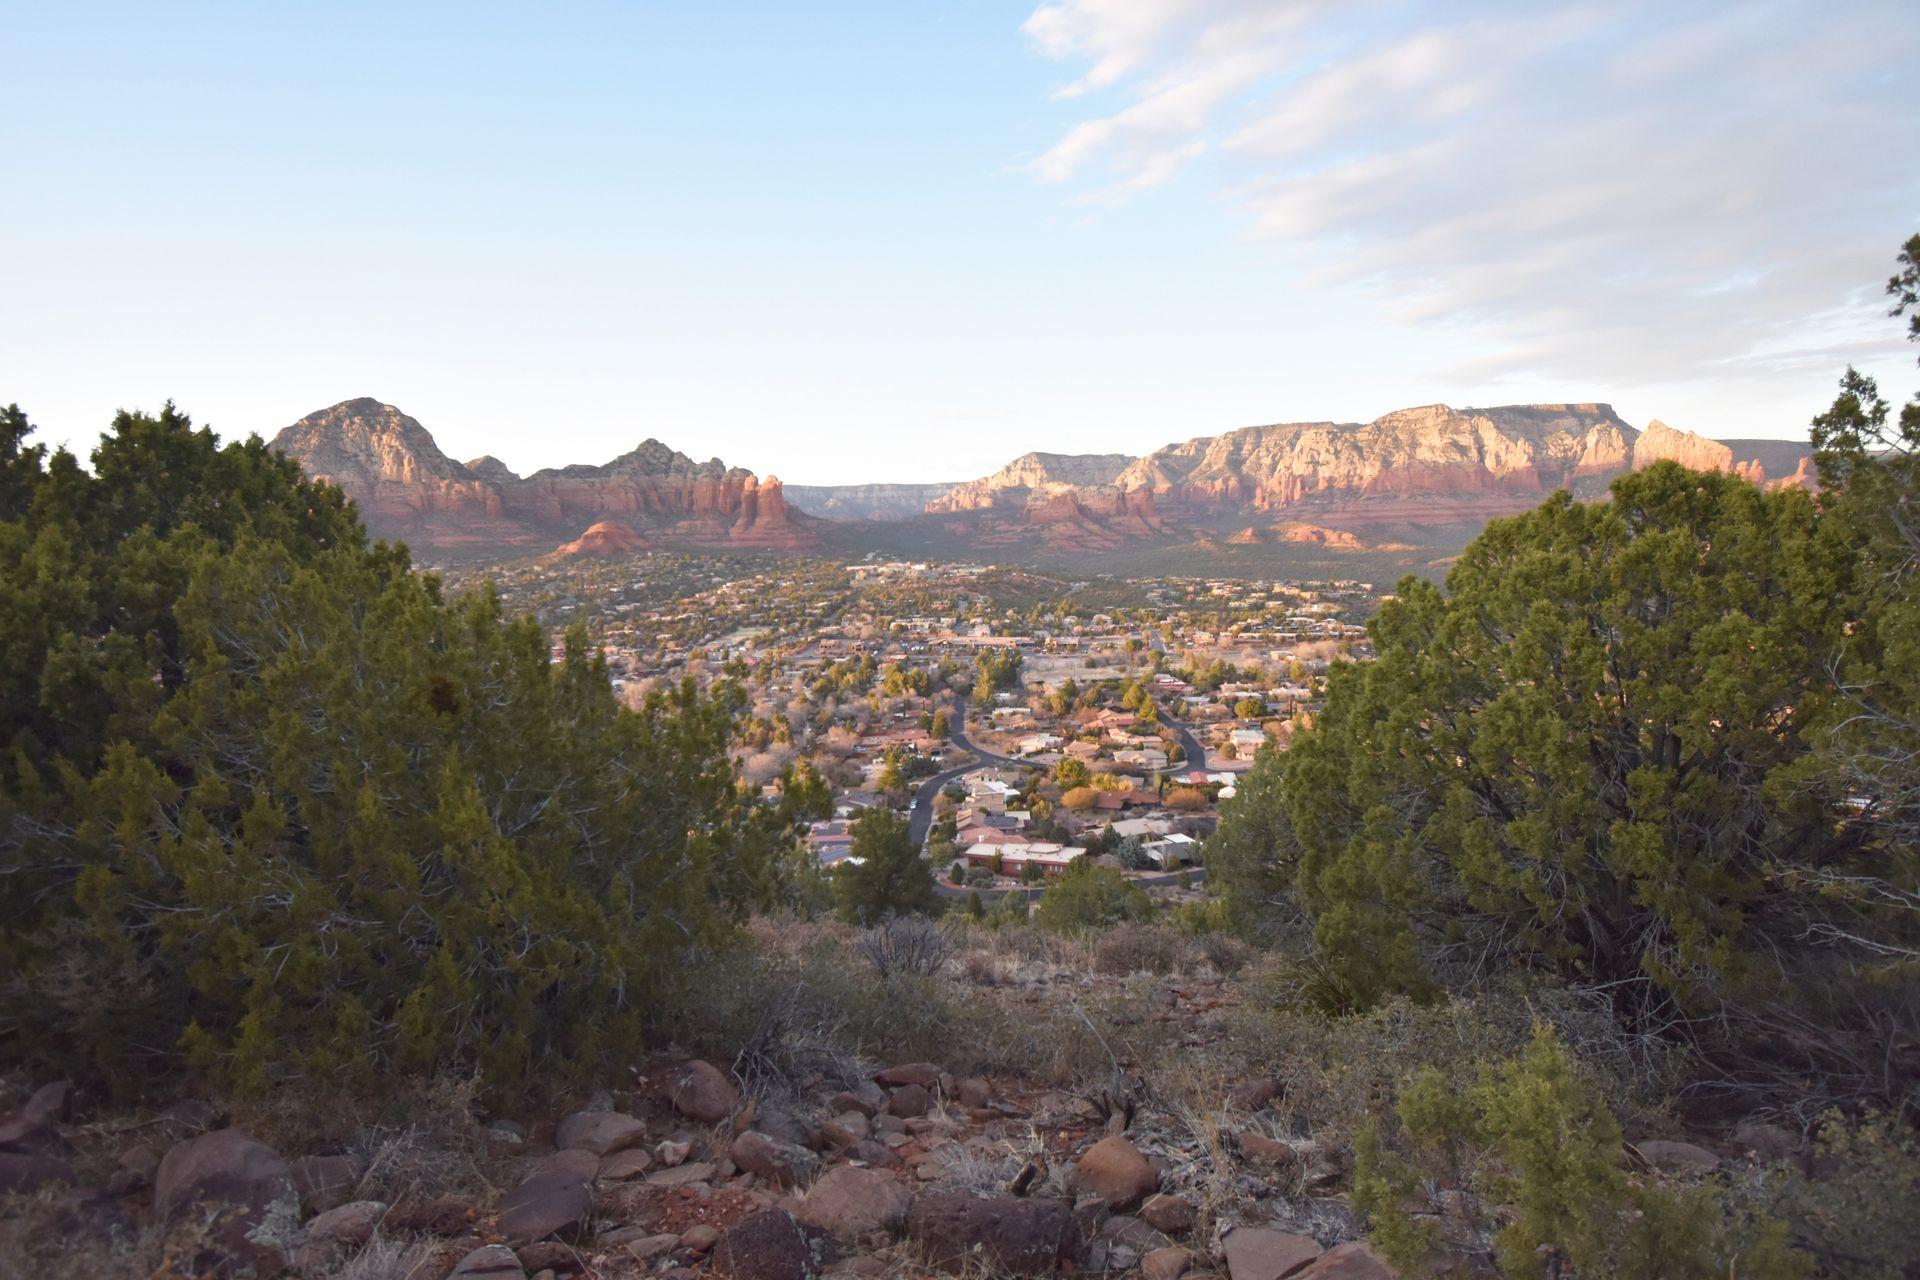 A view looking down at the city of Sedona with mountains in the background.